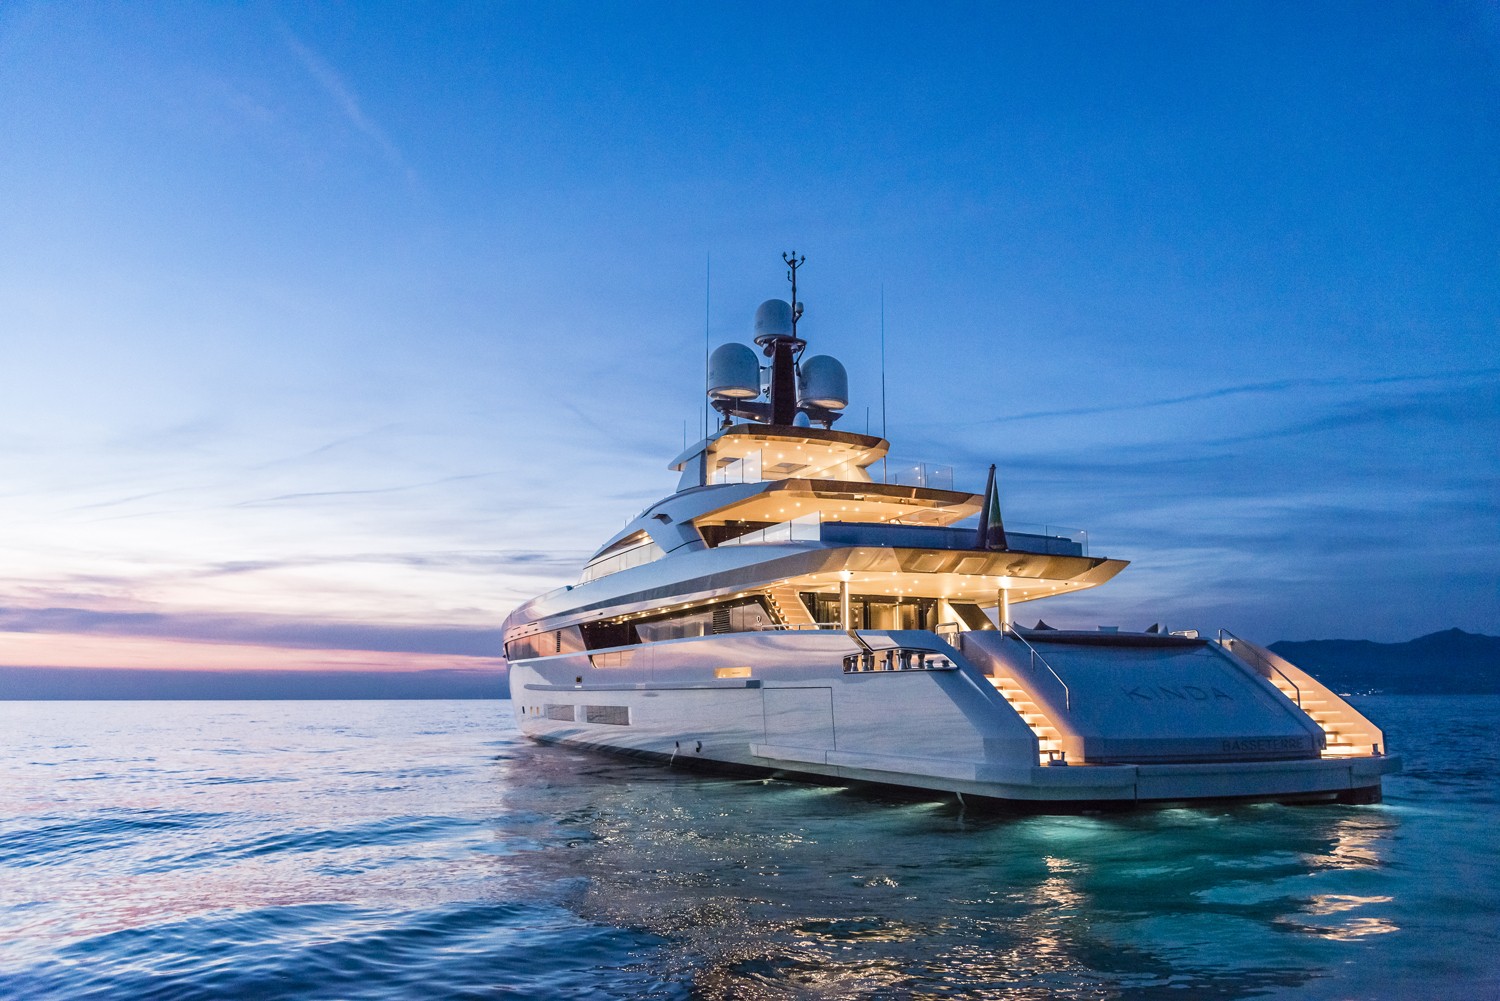 Tankoa's Kinda Superyacht Is Able to Offer the Picture-Perfect Luxury ...